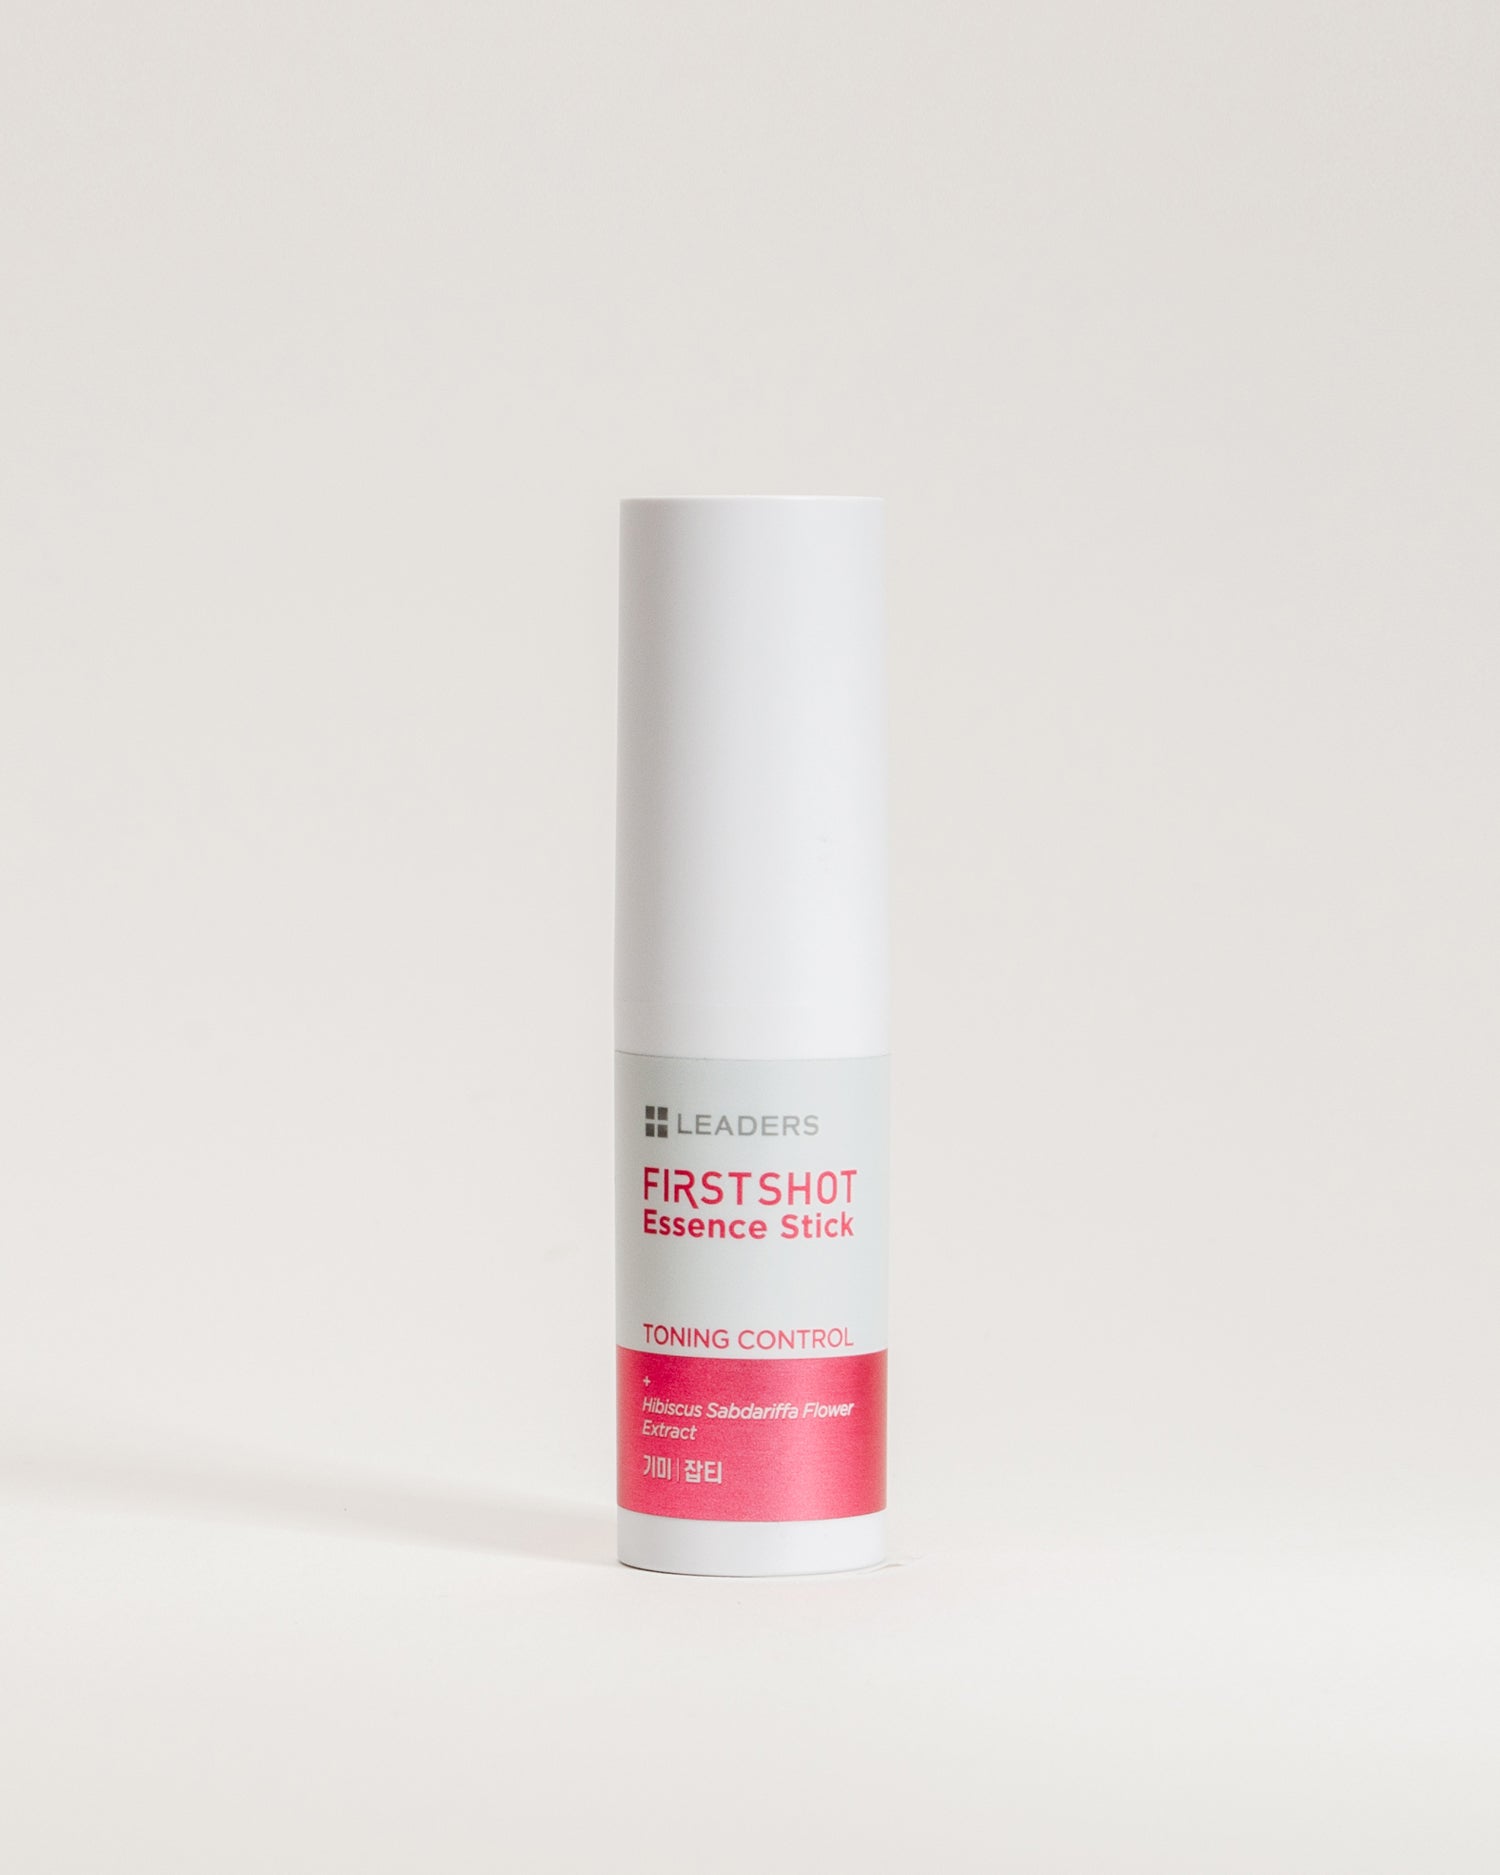 LEADERS First Shot Essence Stick Toning Control